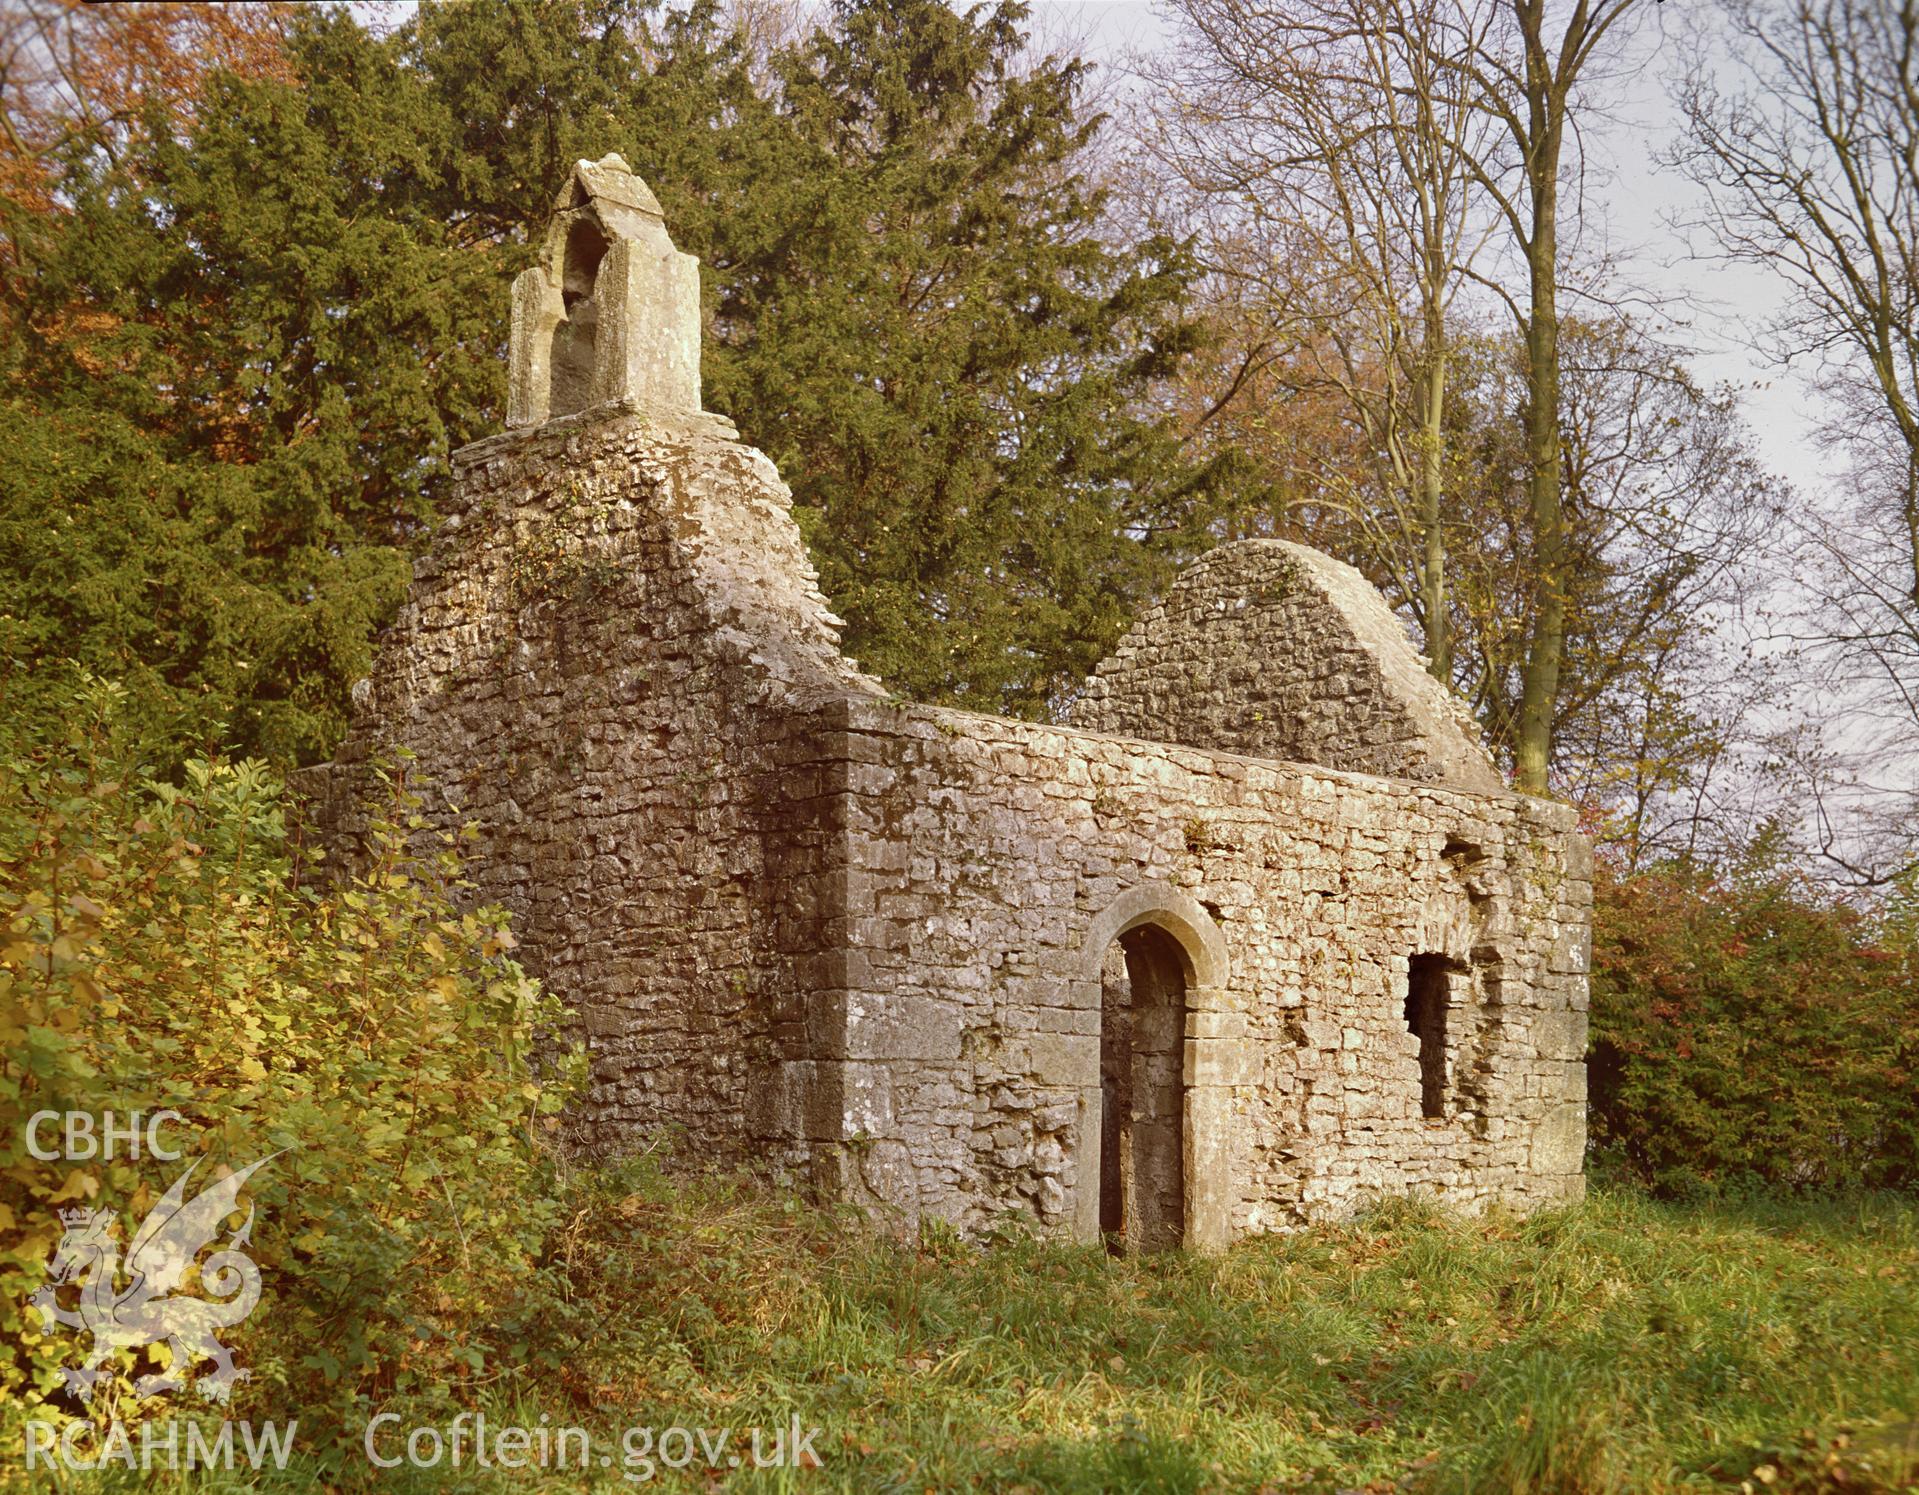 Colour transparency showing a view of St Roque's Chapel, Merthyr Mawr produced by RCAHMW, c.1980